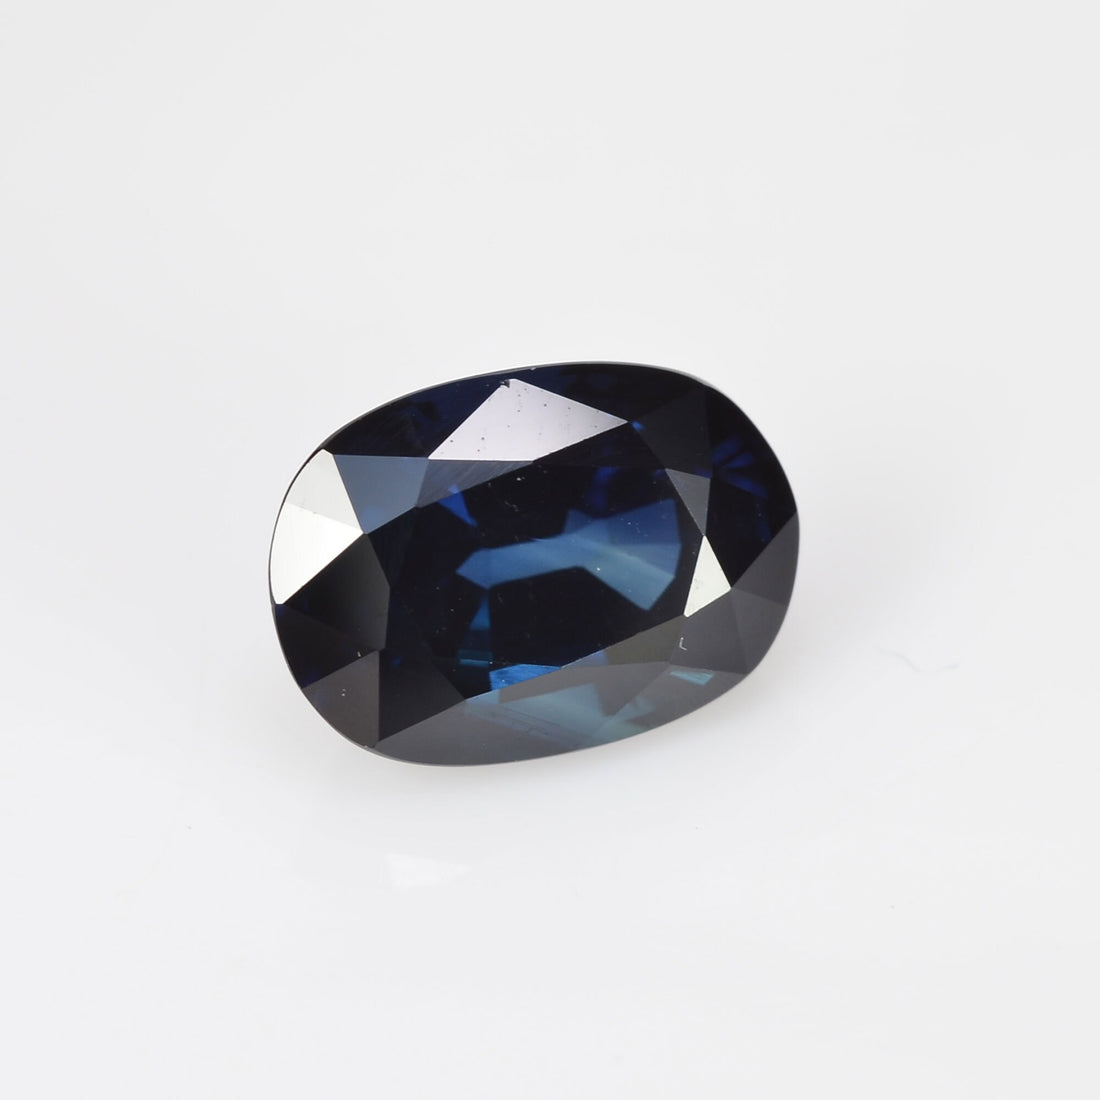 4.20 cts Natural Teal Blue Green Sapphire Loose Gemstone Oval Cut